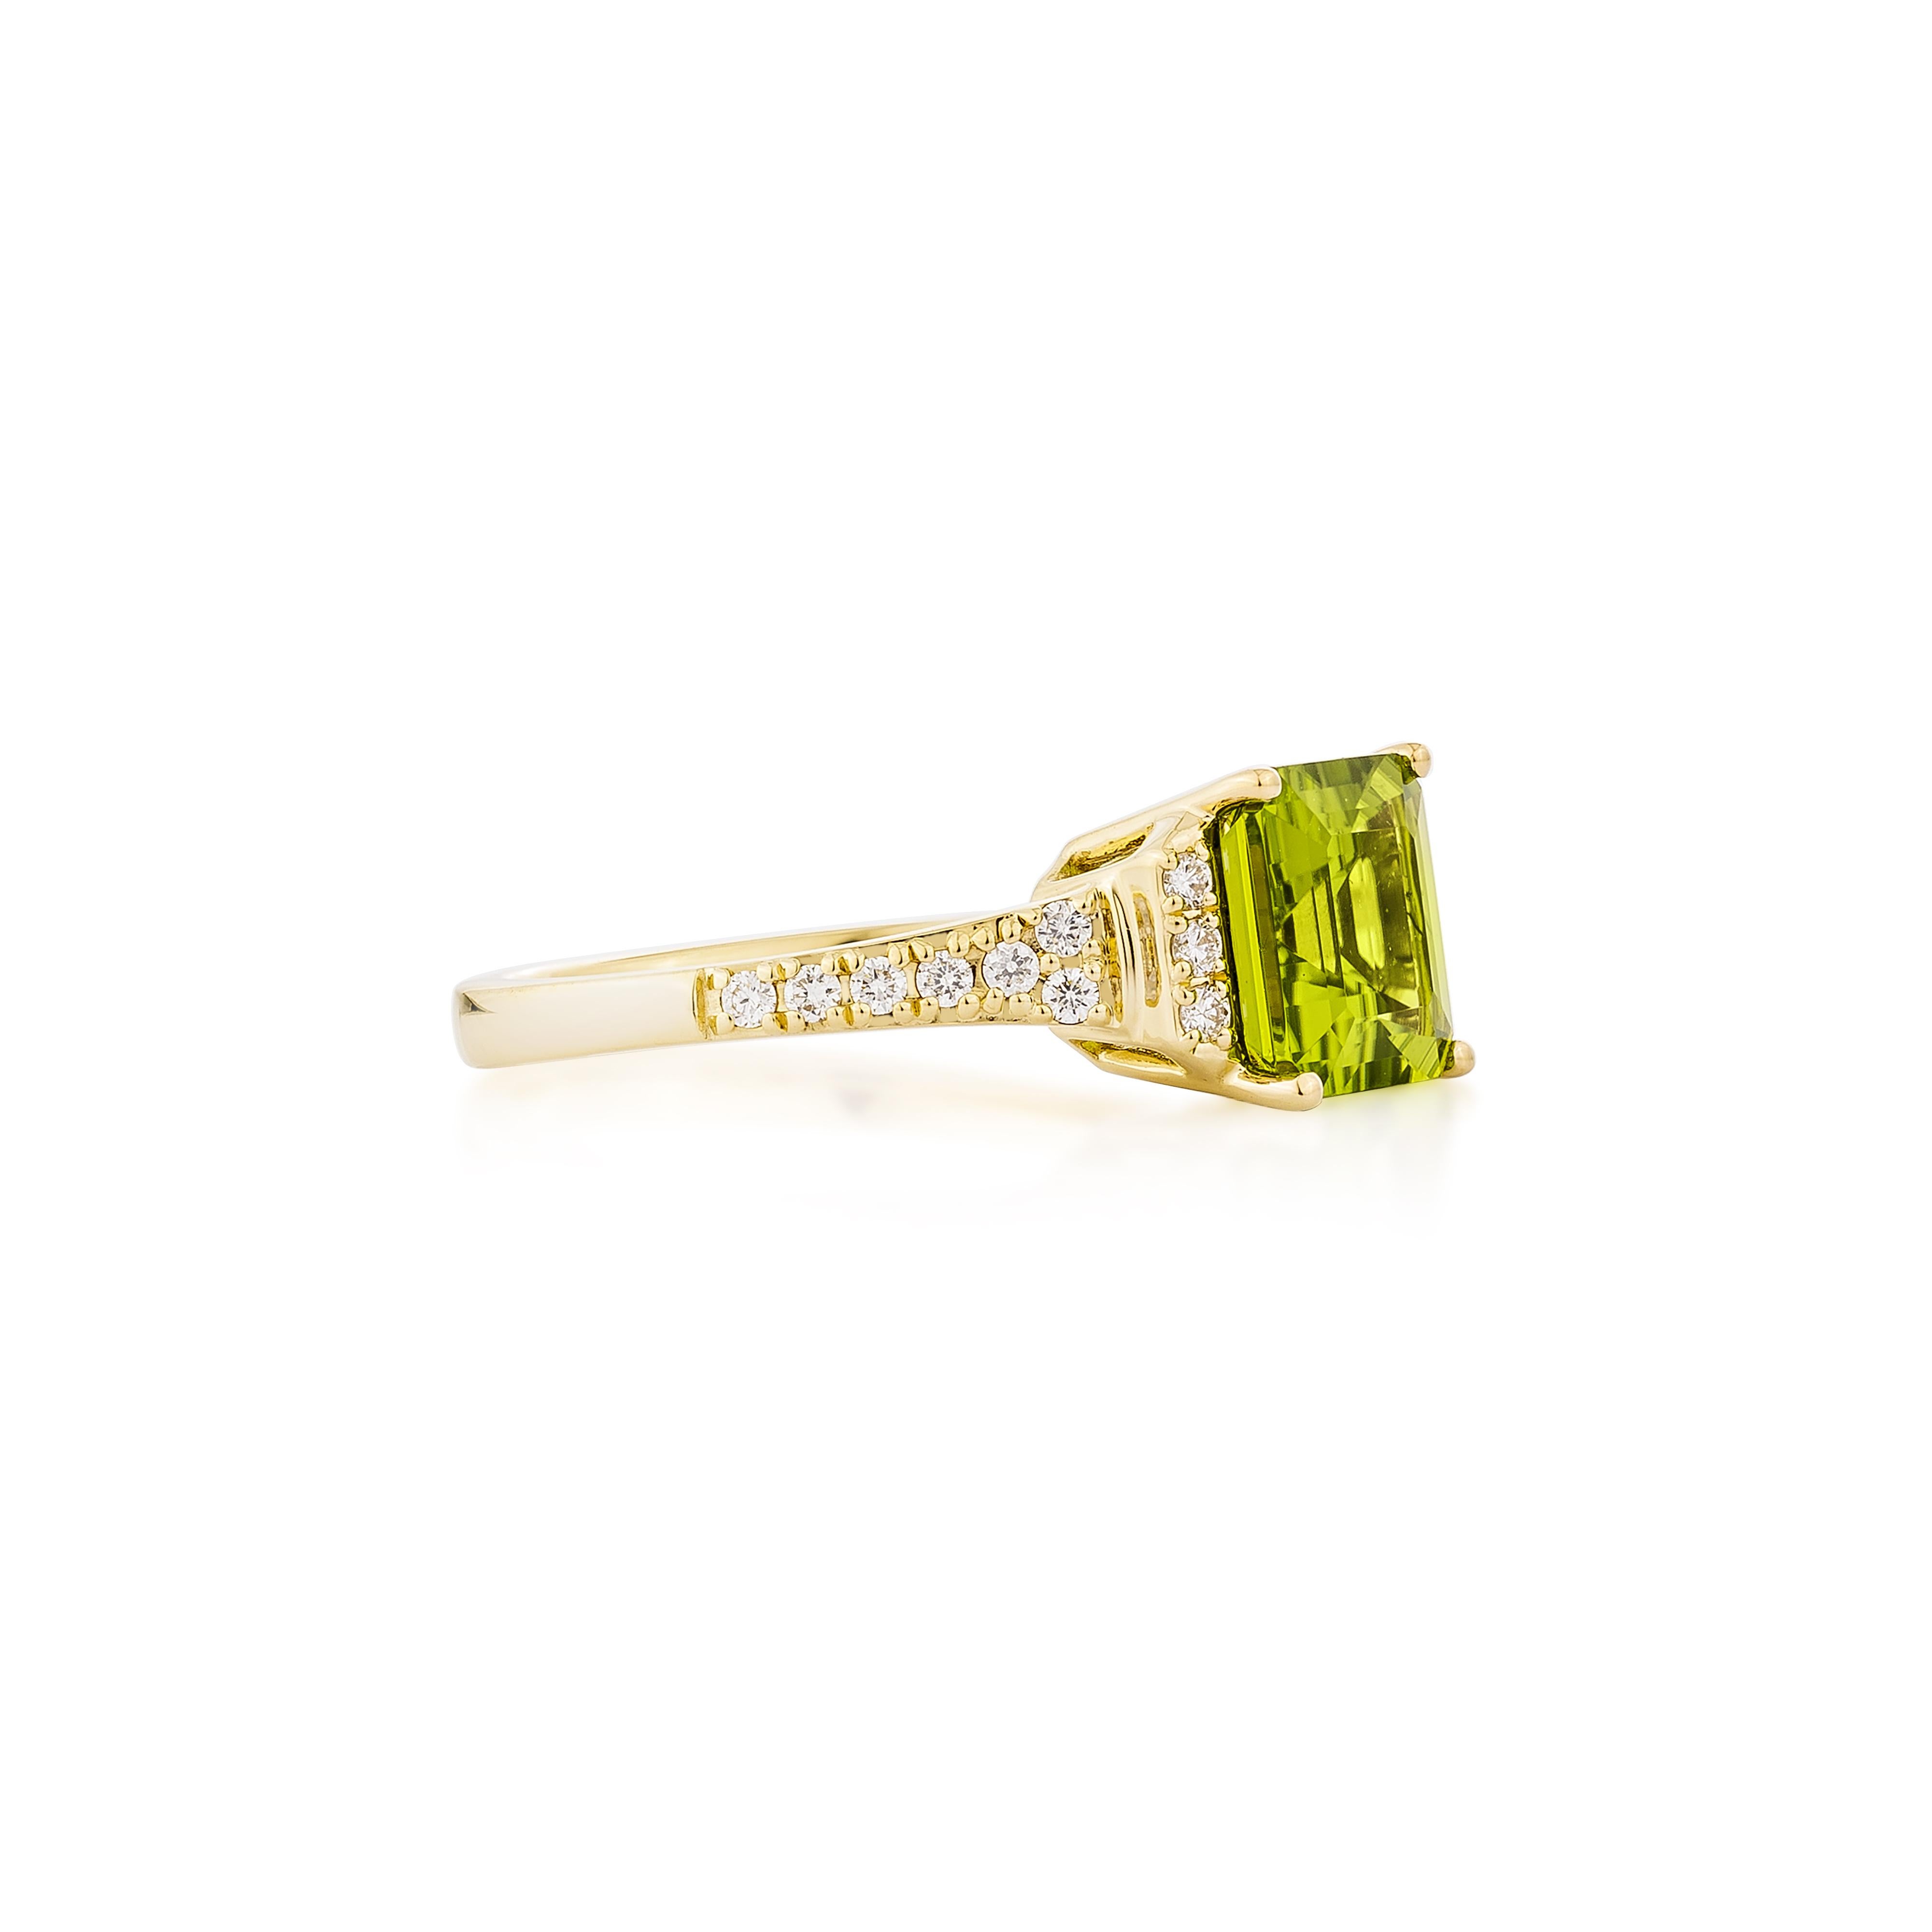 Presented A beautiful selection of jewels, including  Peridot, rhodolite, is ideal for people who respect quality and wish to wear it to any occasion or party. One of them is a yellow gold Peridot ring with a basic yet lovely design.

Peridot Fancy